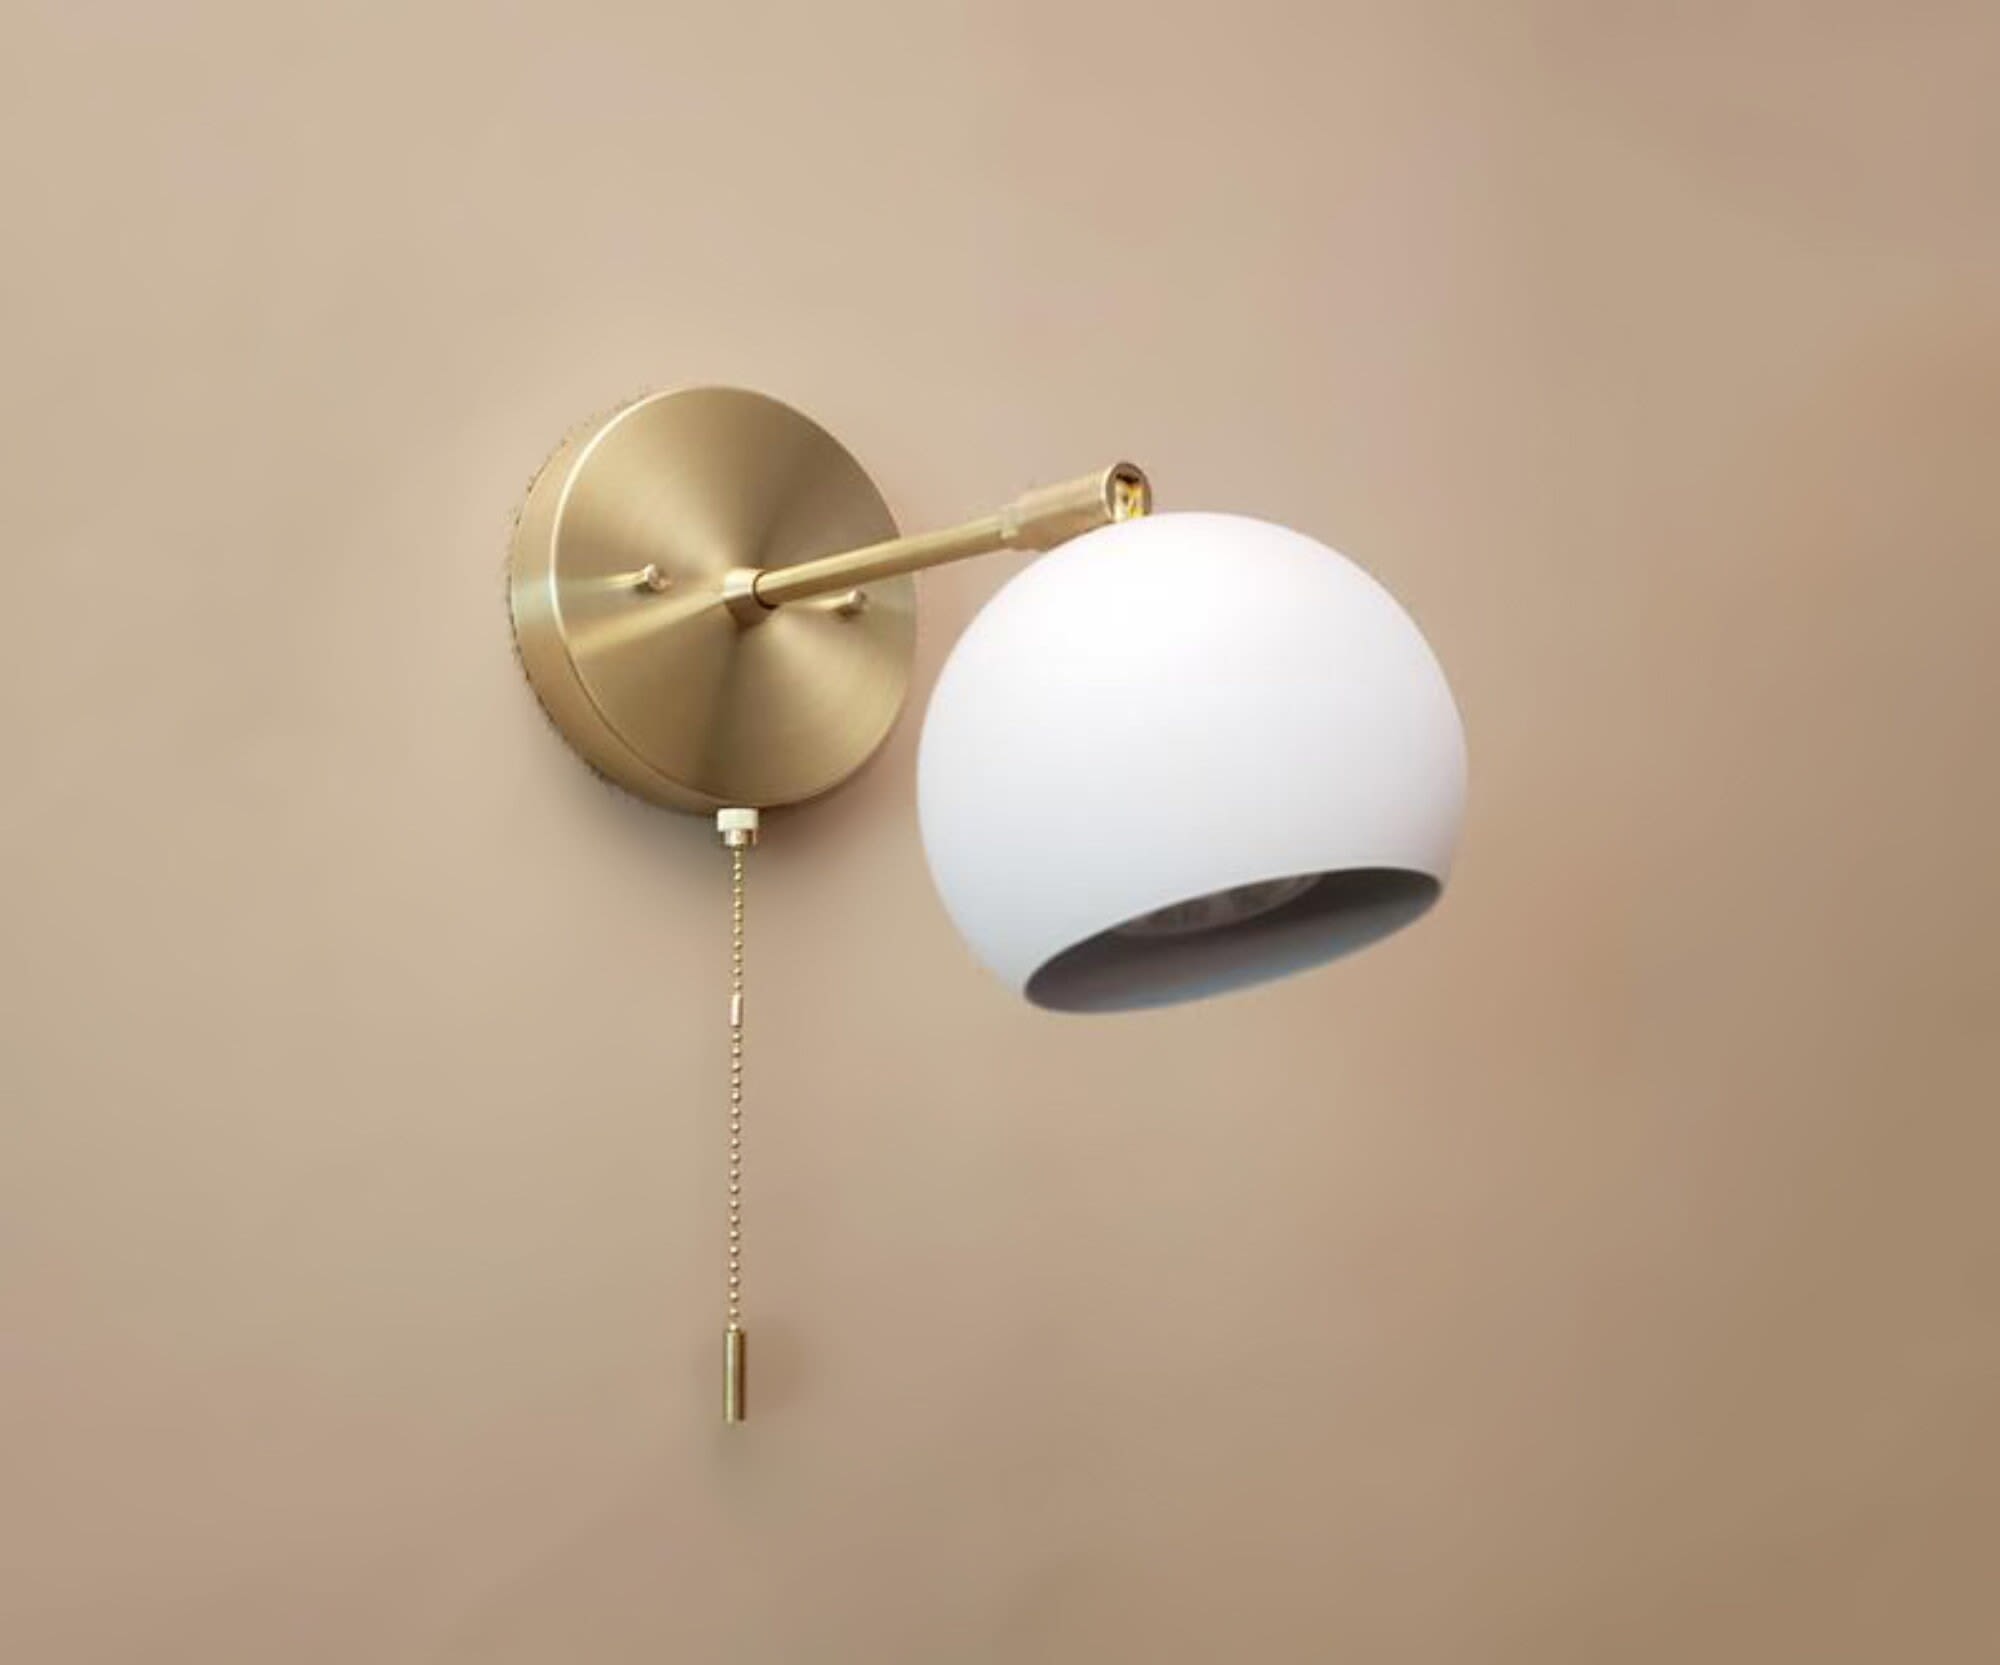 Pull Chain Adjustable Wall Light - Gold and White Modern by Retro Steam  Works